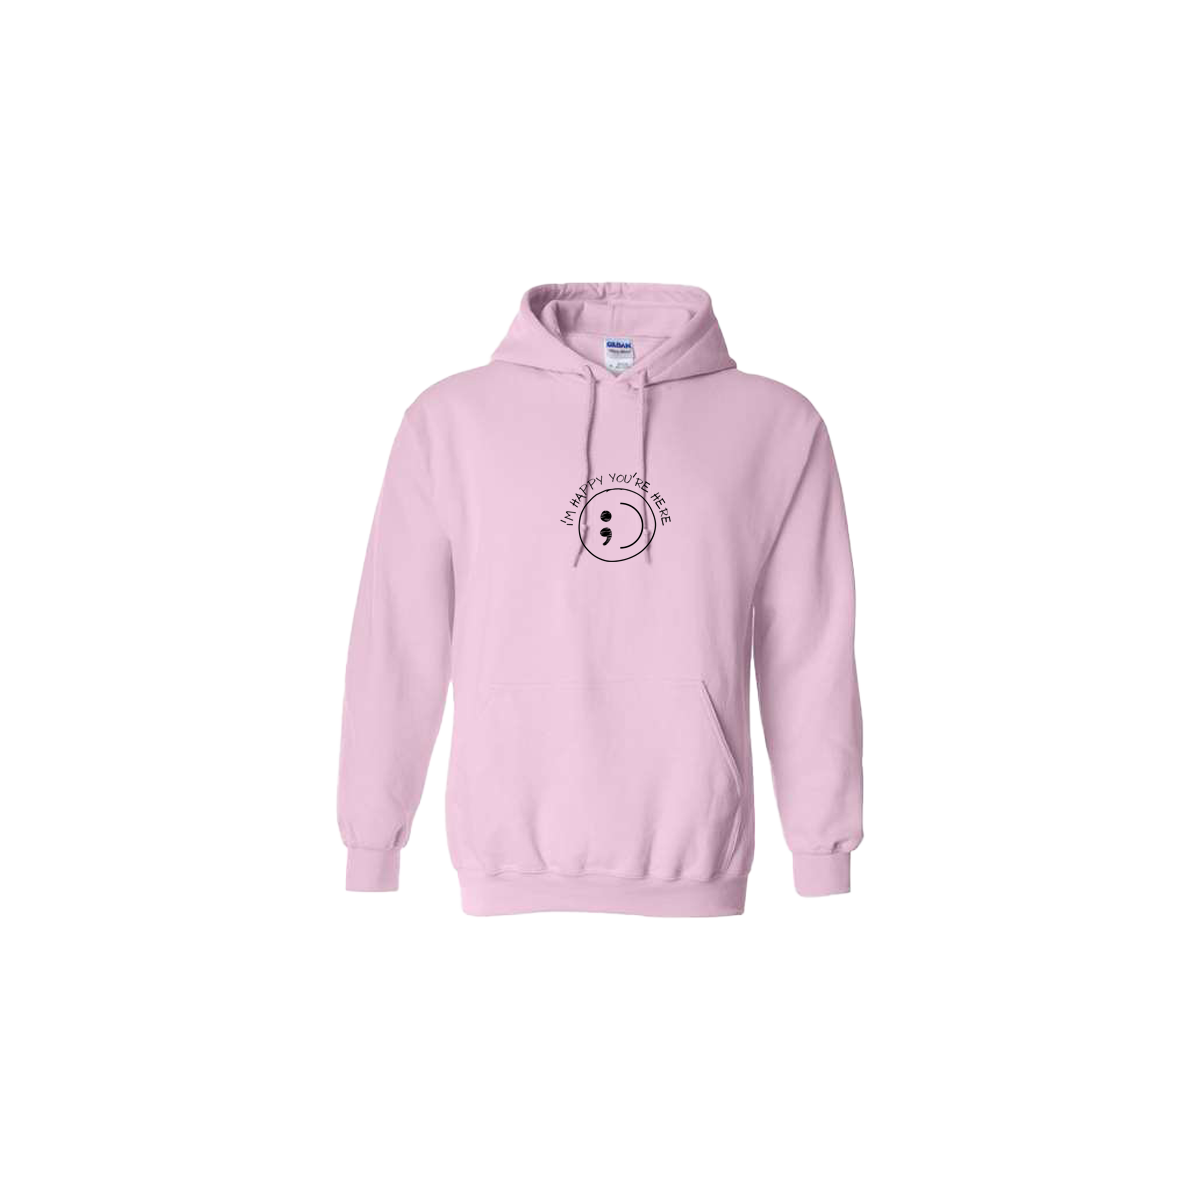 I'm Happy You're Here Embroidered Light Pink Hoodie - Mental Health Awareness Clothing